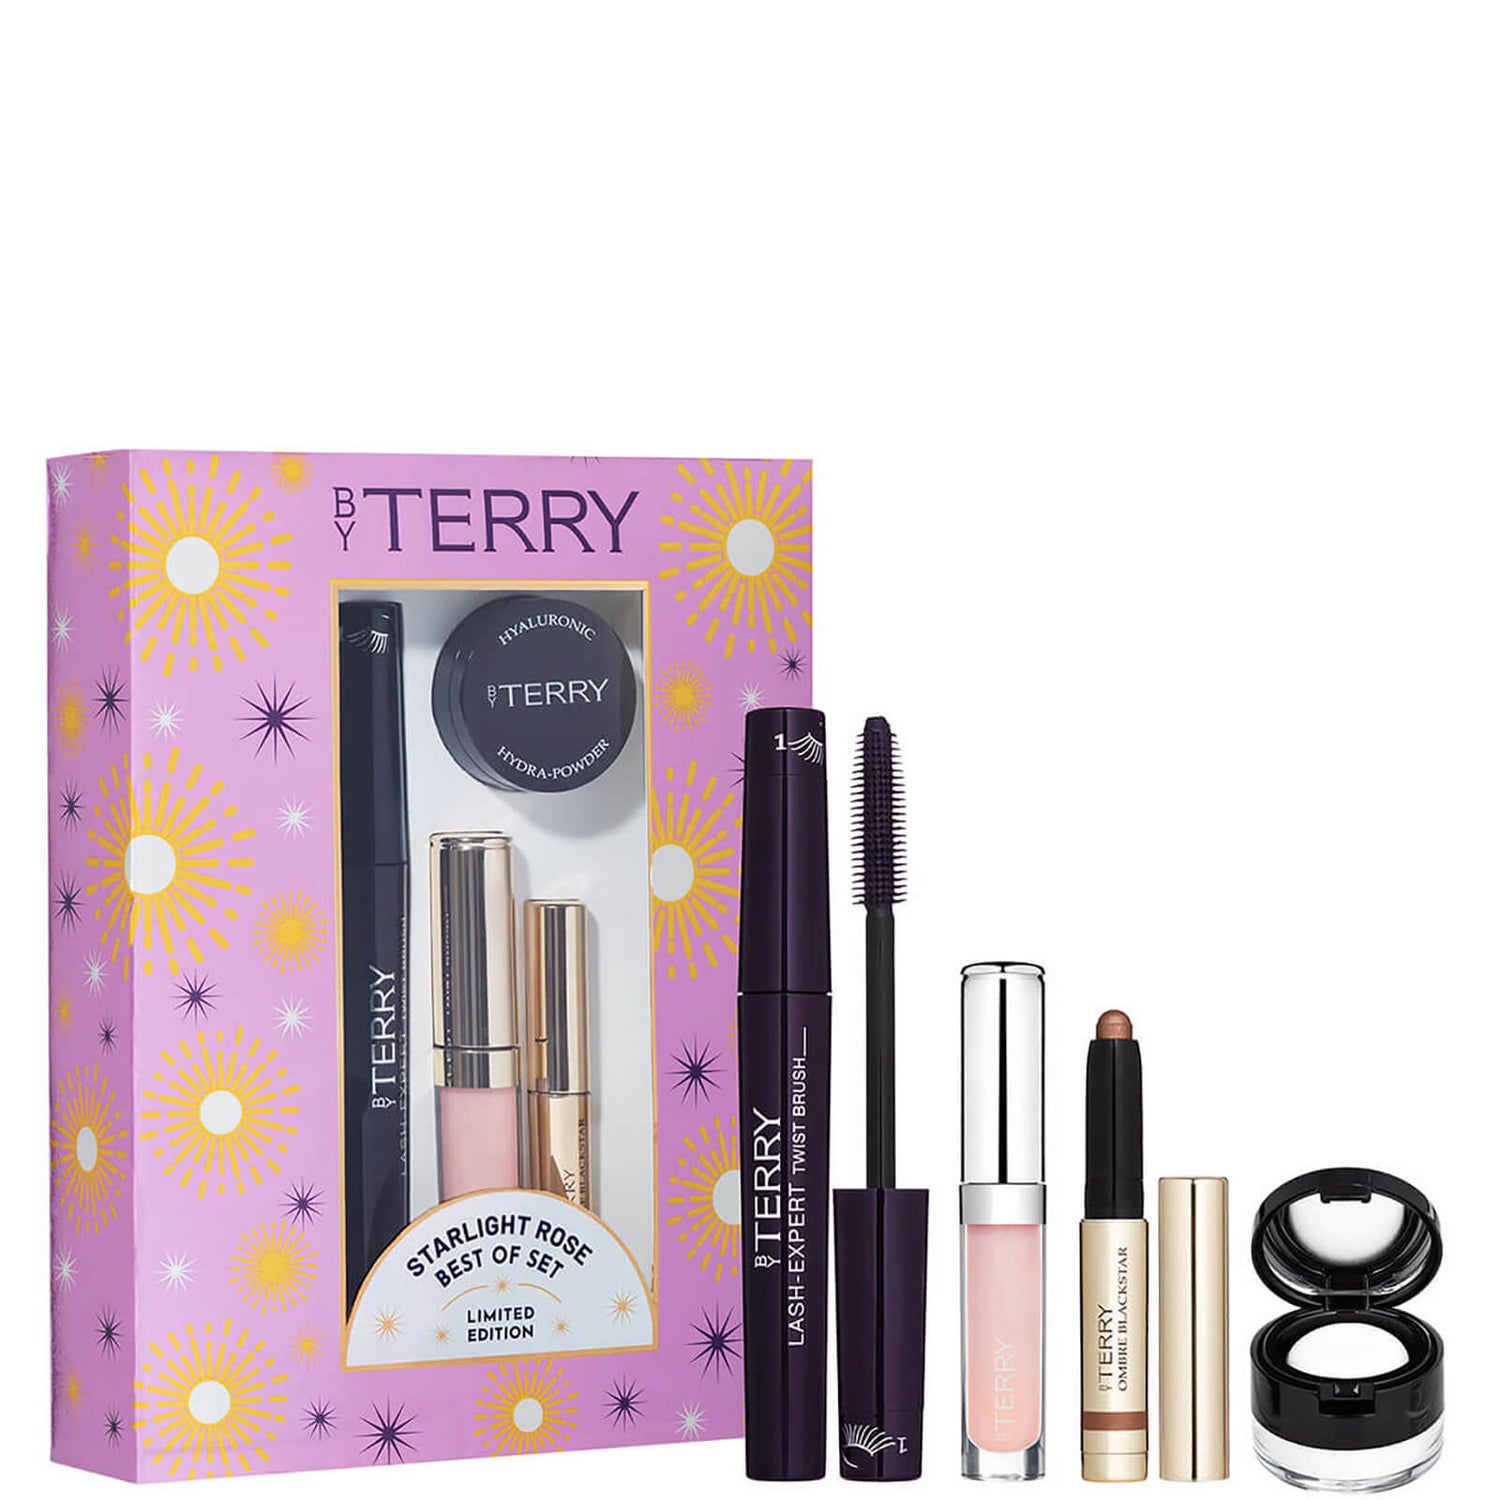 By Terry Starlight Rose Best Of Set (Worth £66.55)